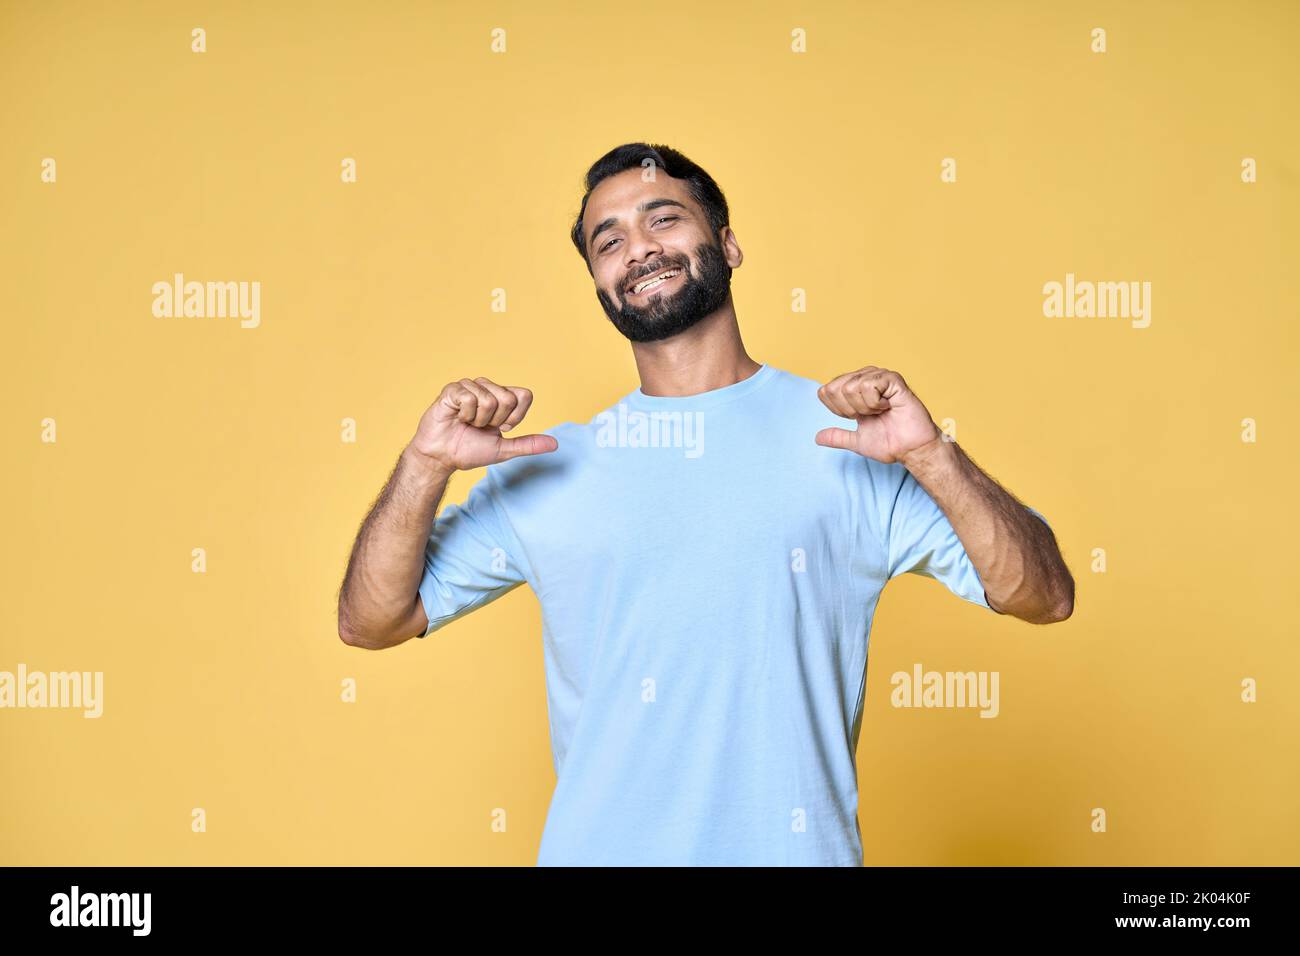 Smiling indian man standing isolated on yellow background pointing at himself. Stock Photo